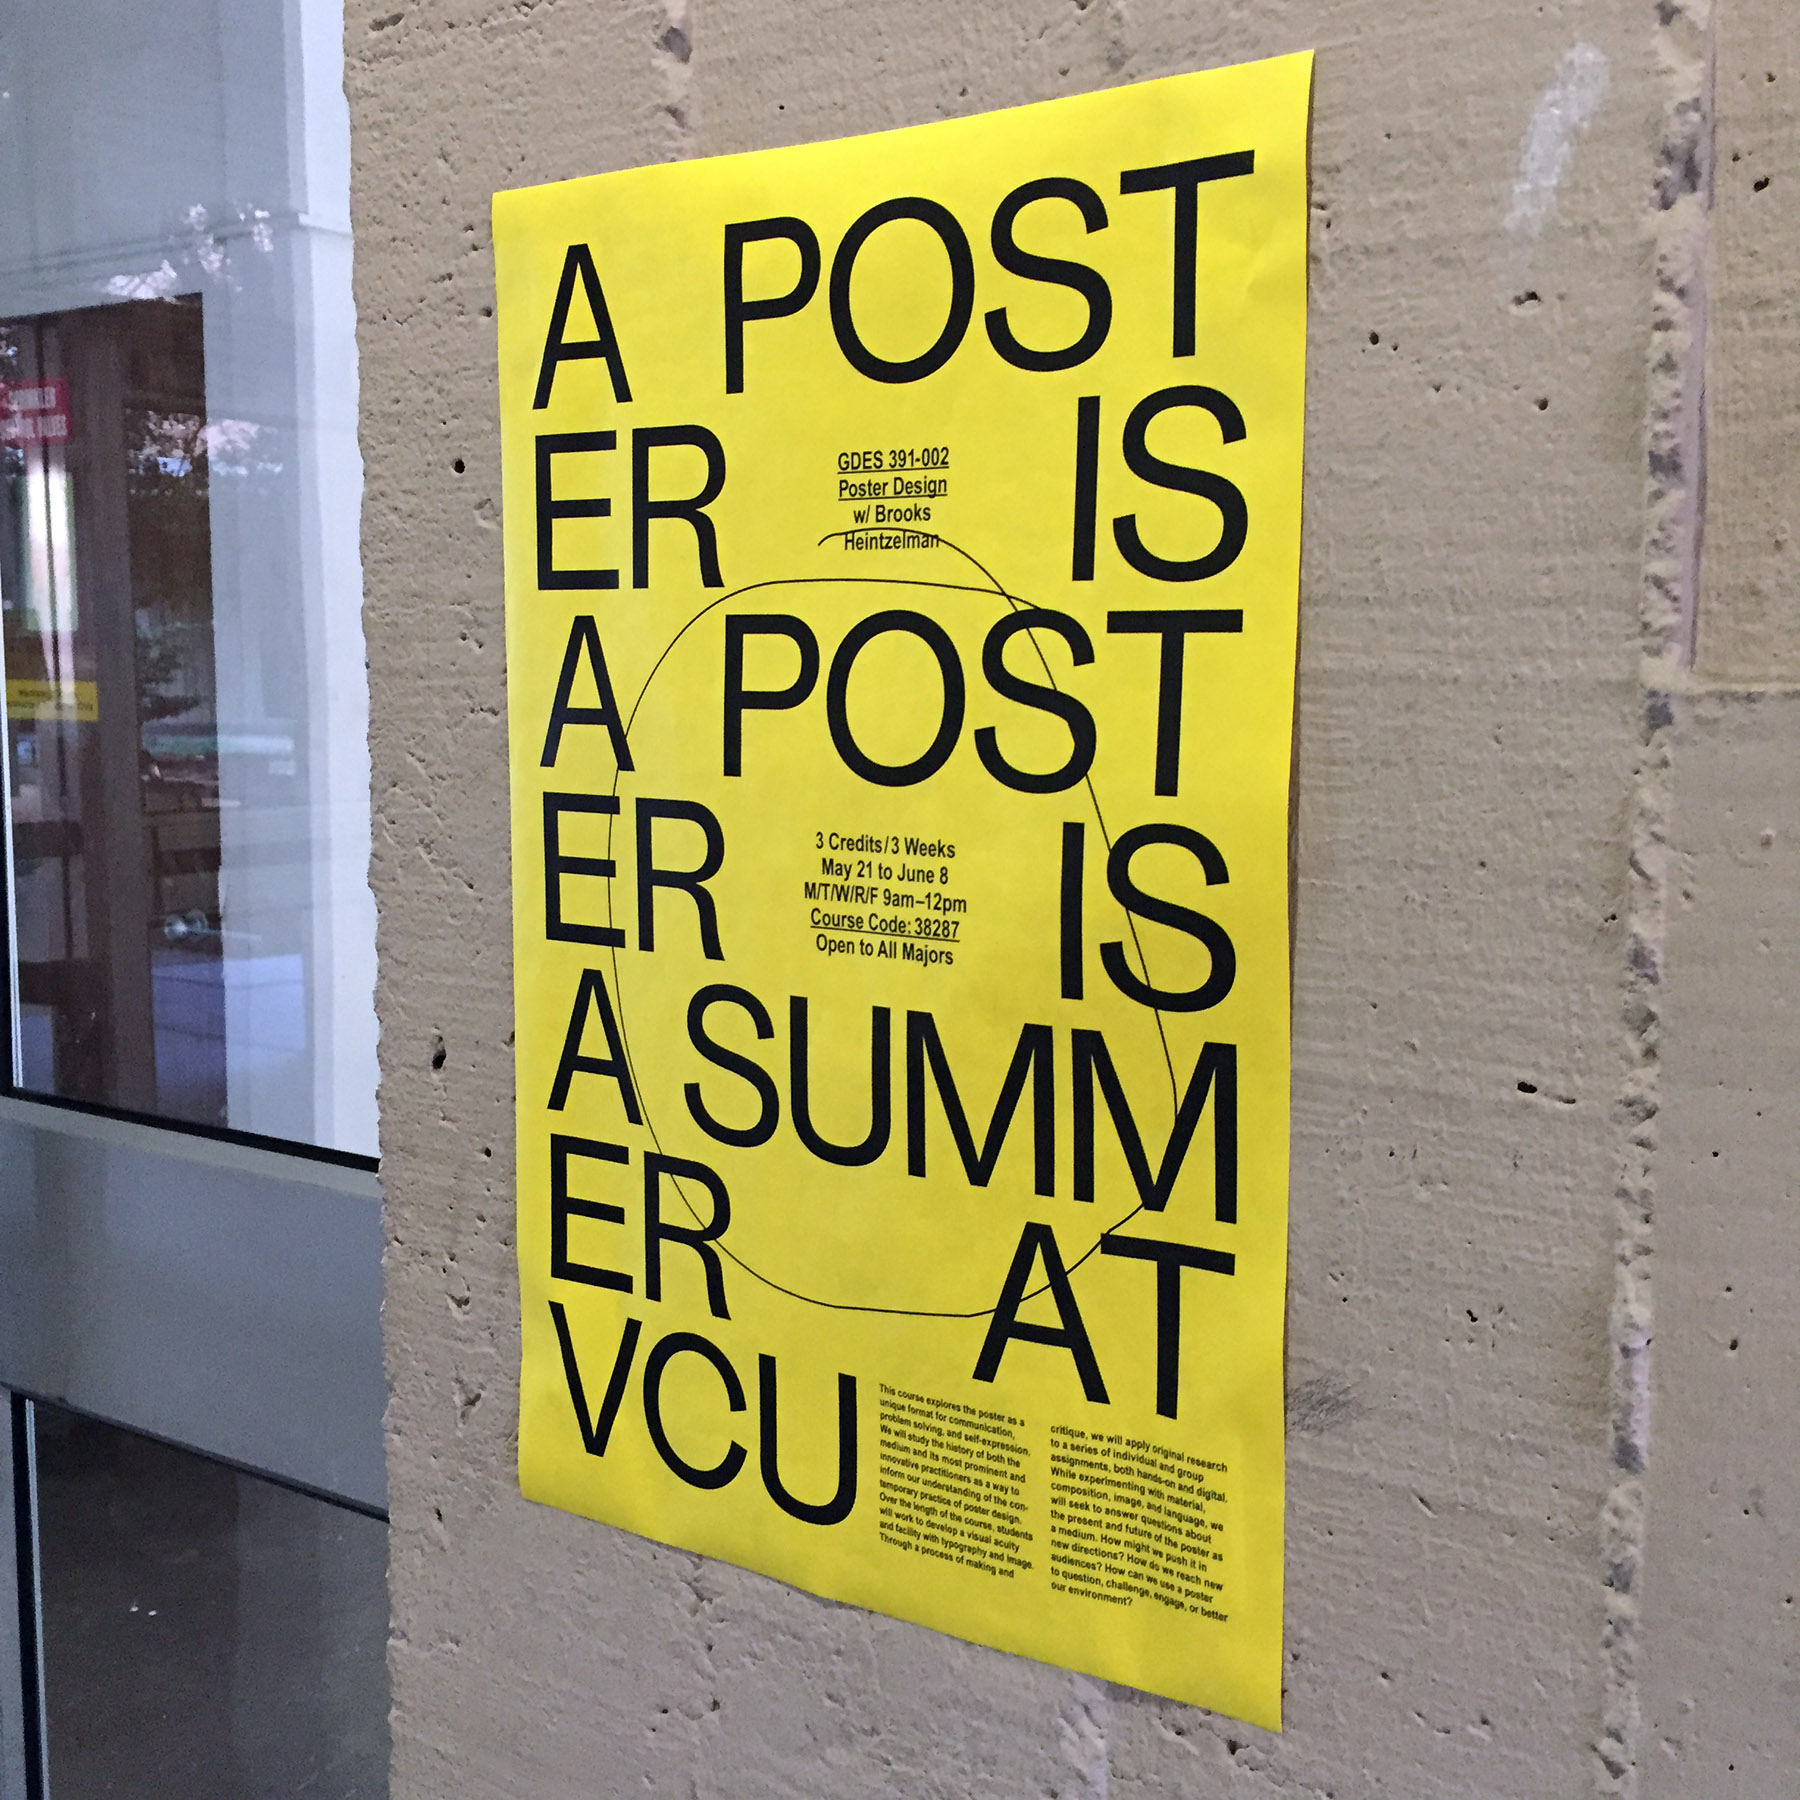 A Poster is a Poster is a Summer at VCU — Brooks Heintzelman, 2017